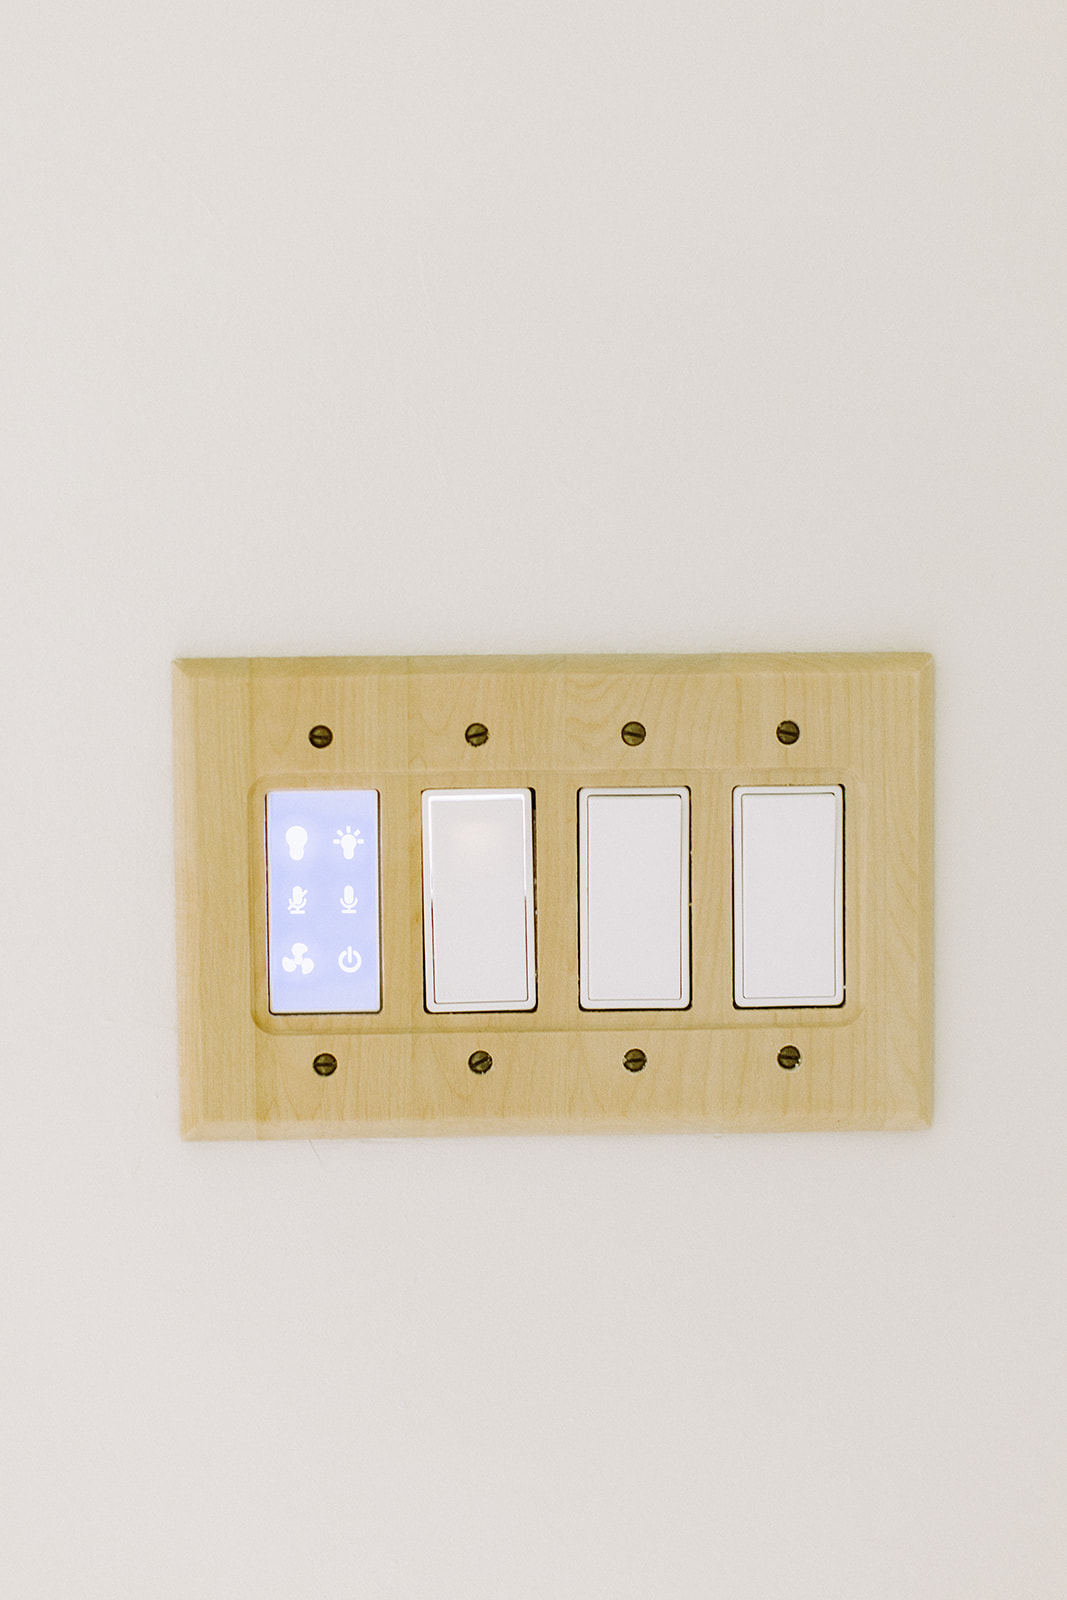 Wood-light-switch-cover-and-alexa-remote Revealing the After! Our Full Bathroom Renovation